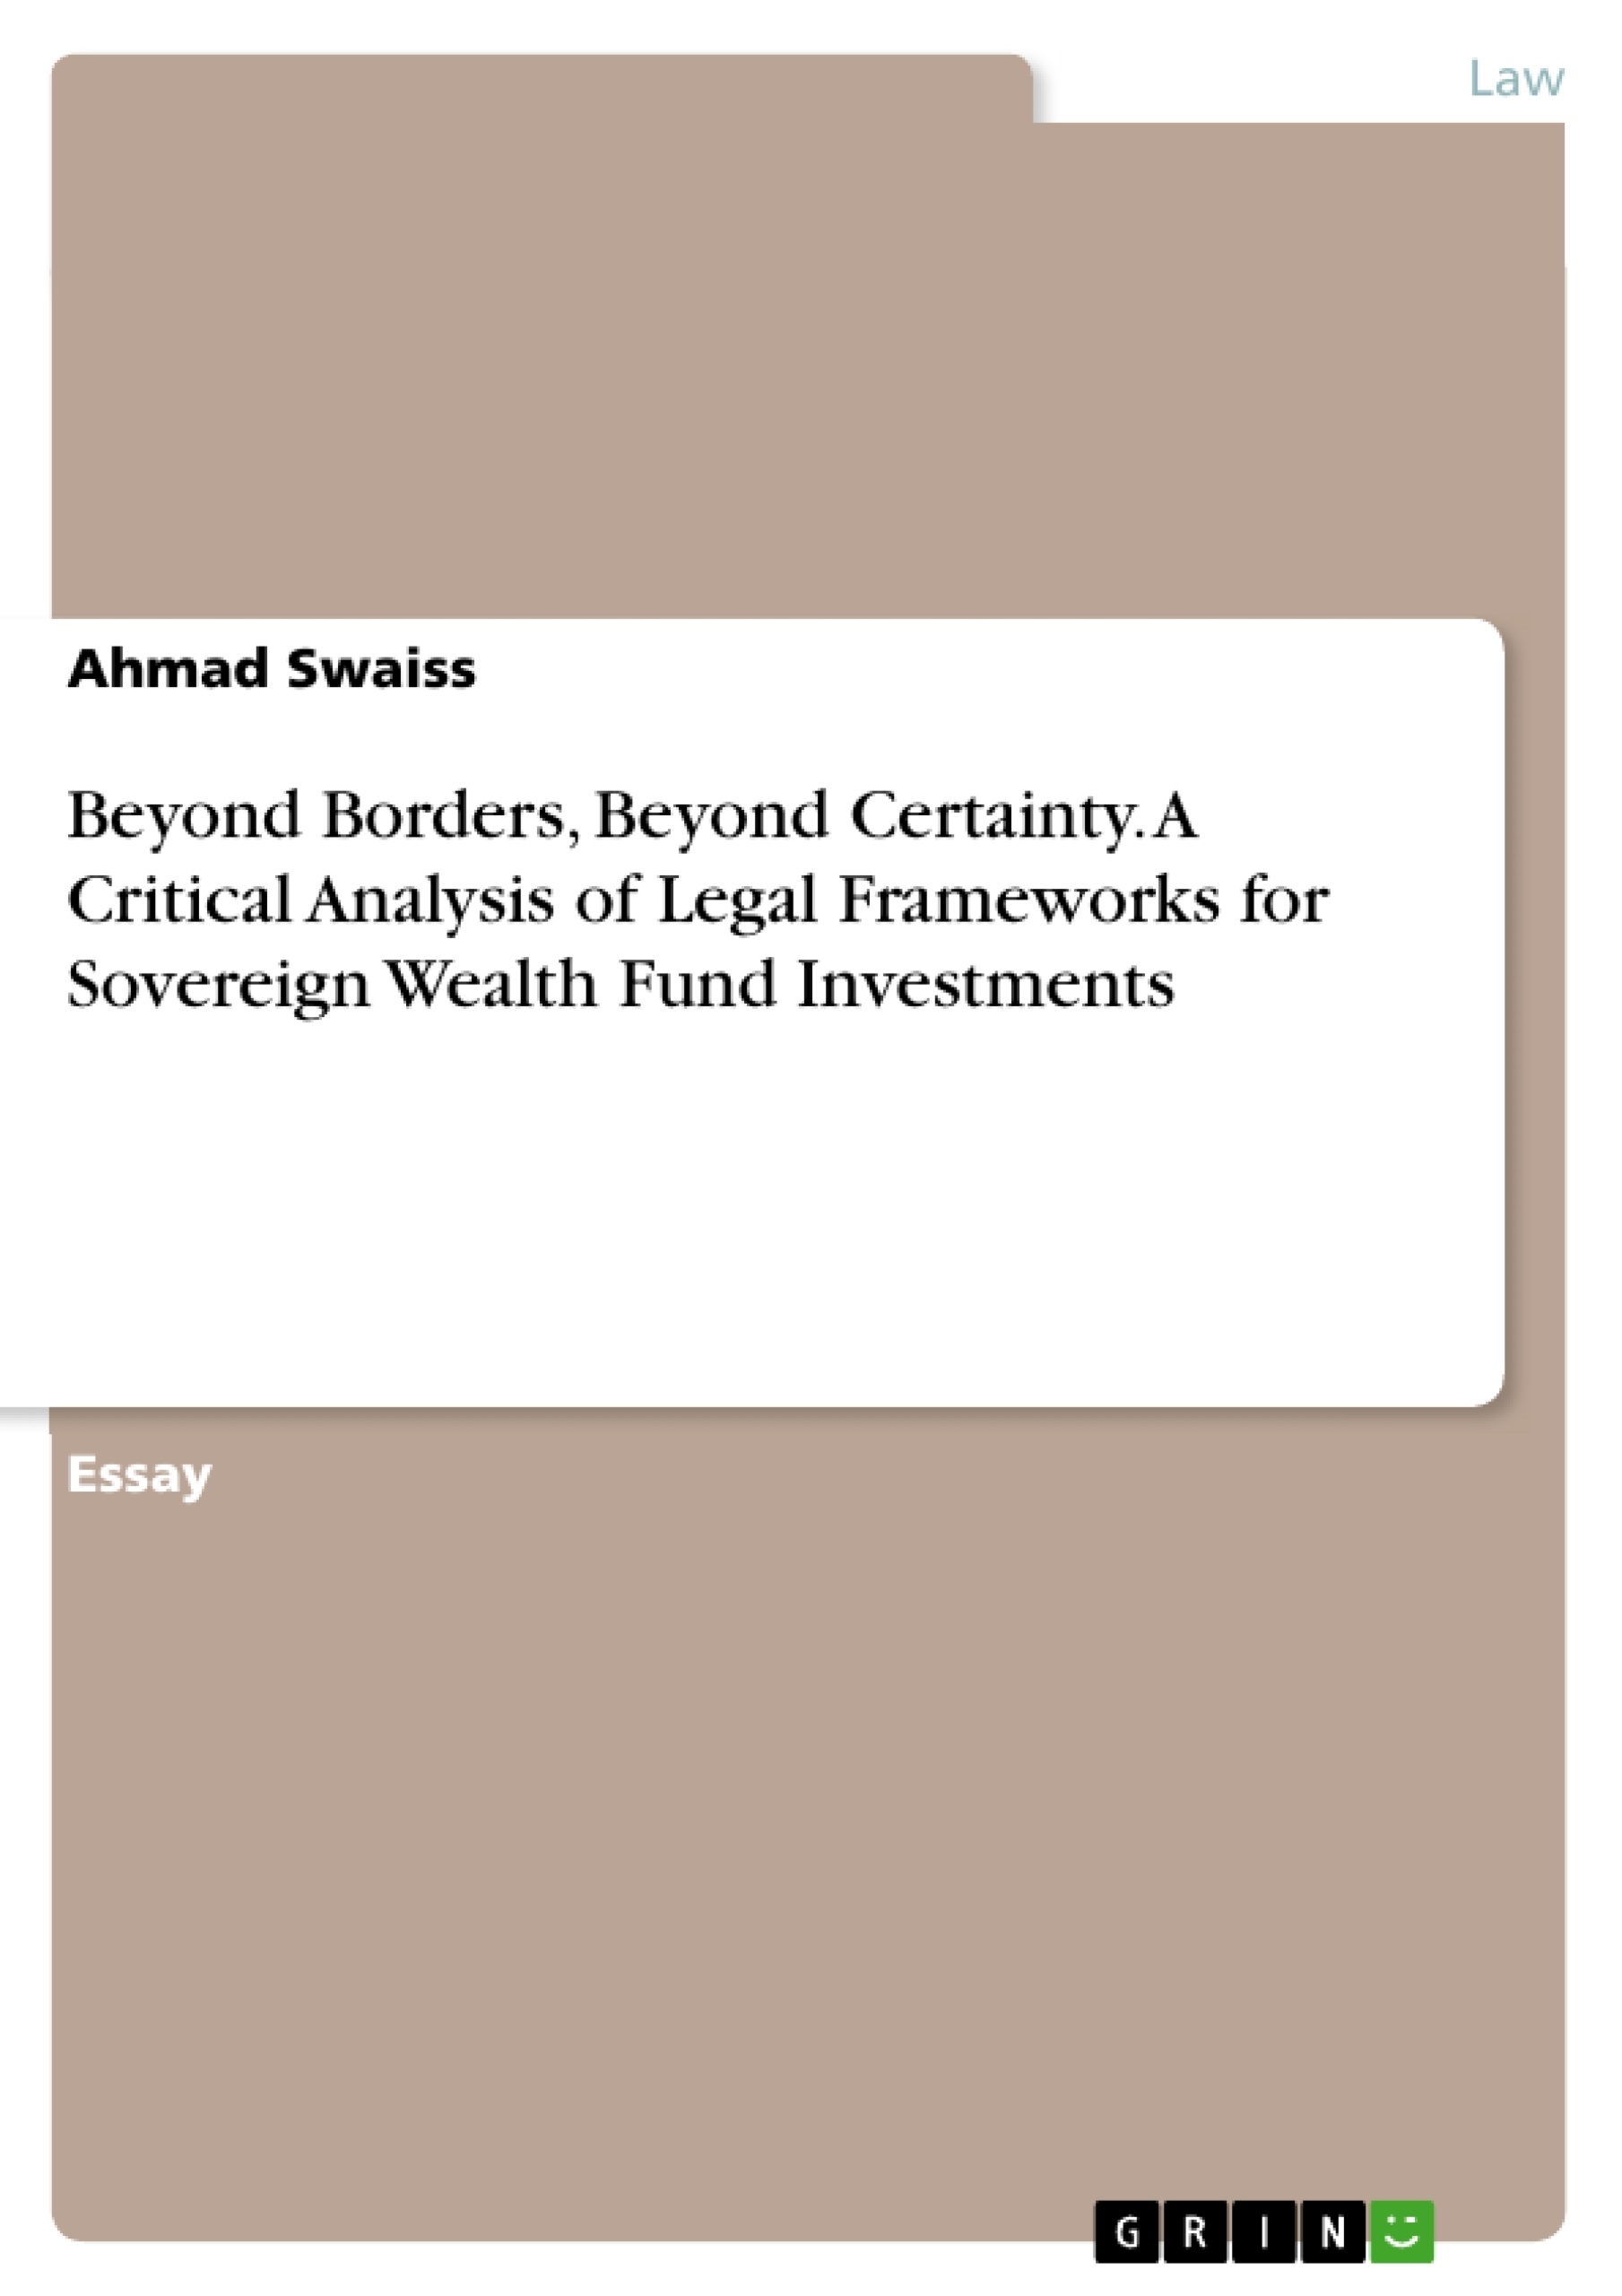 Titre: Beyond Borders, Beyond Certainty. A Critical Analysis of Legal Frameworks for Sovereign Wealth Fund Investments